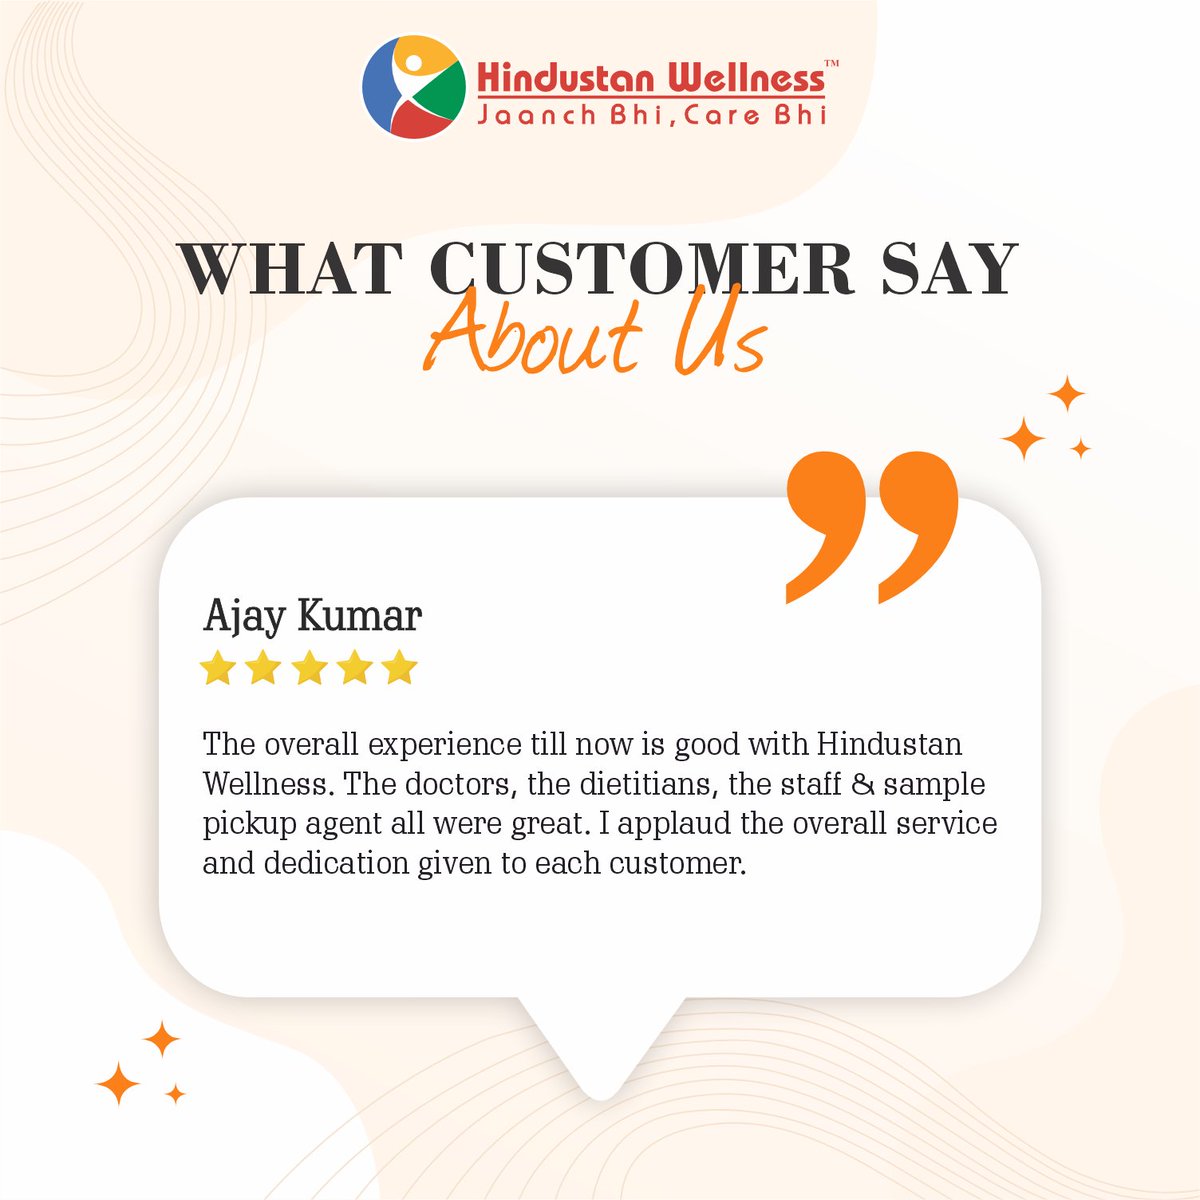 All you need is a happy customer to be more driven towards success. Thank you for the awesome feedback.

#happycustomer #happy #customerfeedback #googlereview #feedback #customerservice #customerreviews #HappyCustomerReview #jaanchbhicarebhi #healthcare #HindustanWellness